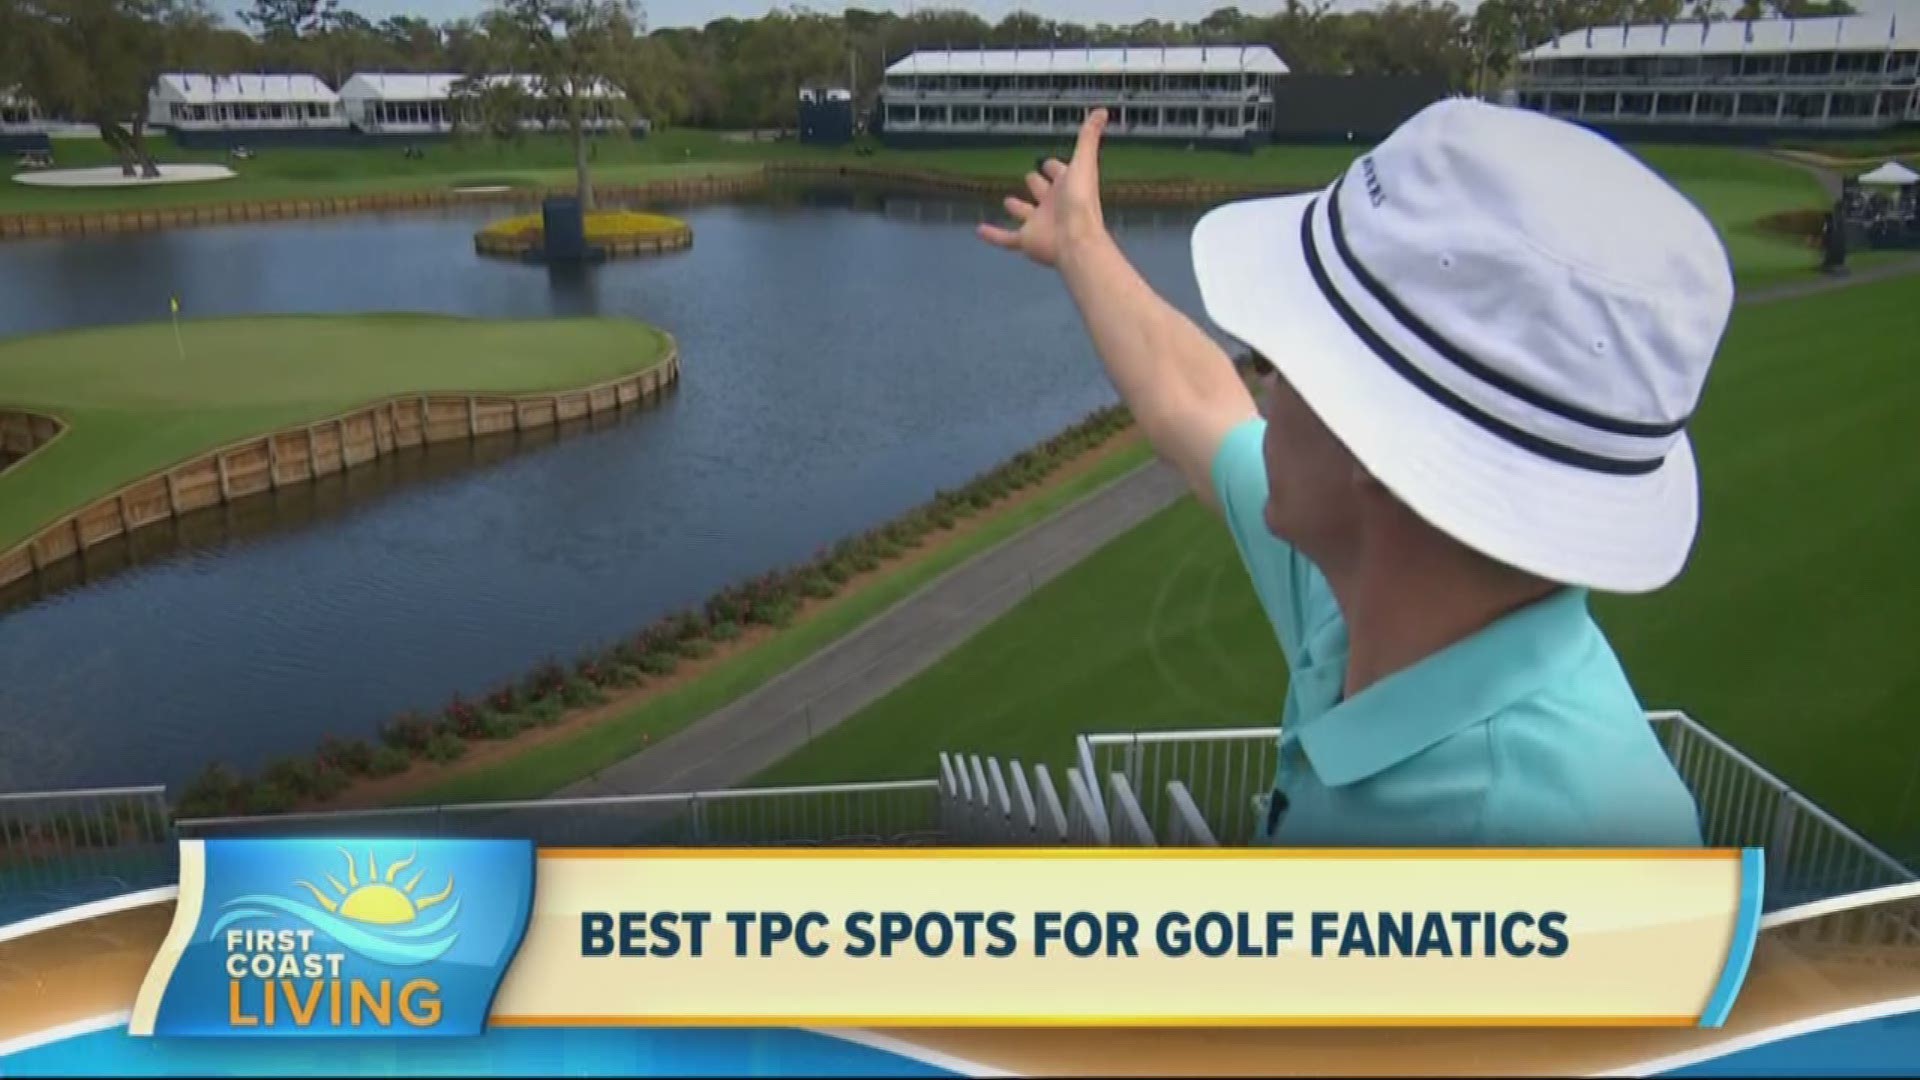 The best spots at The Players Championship for golf fanantics.